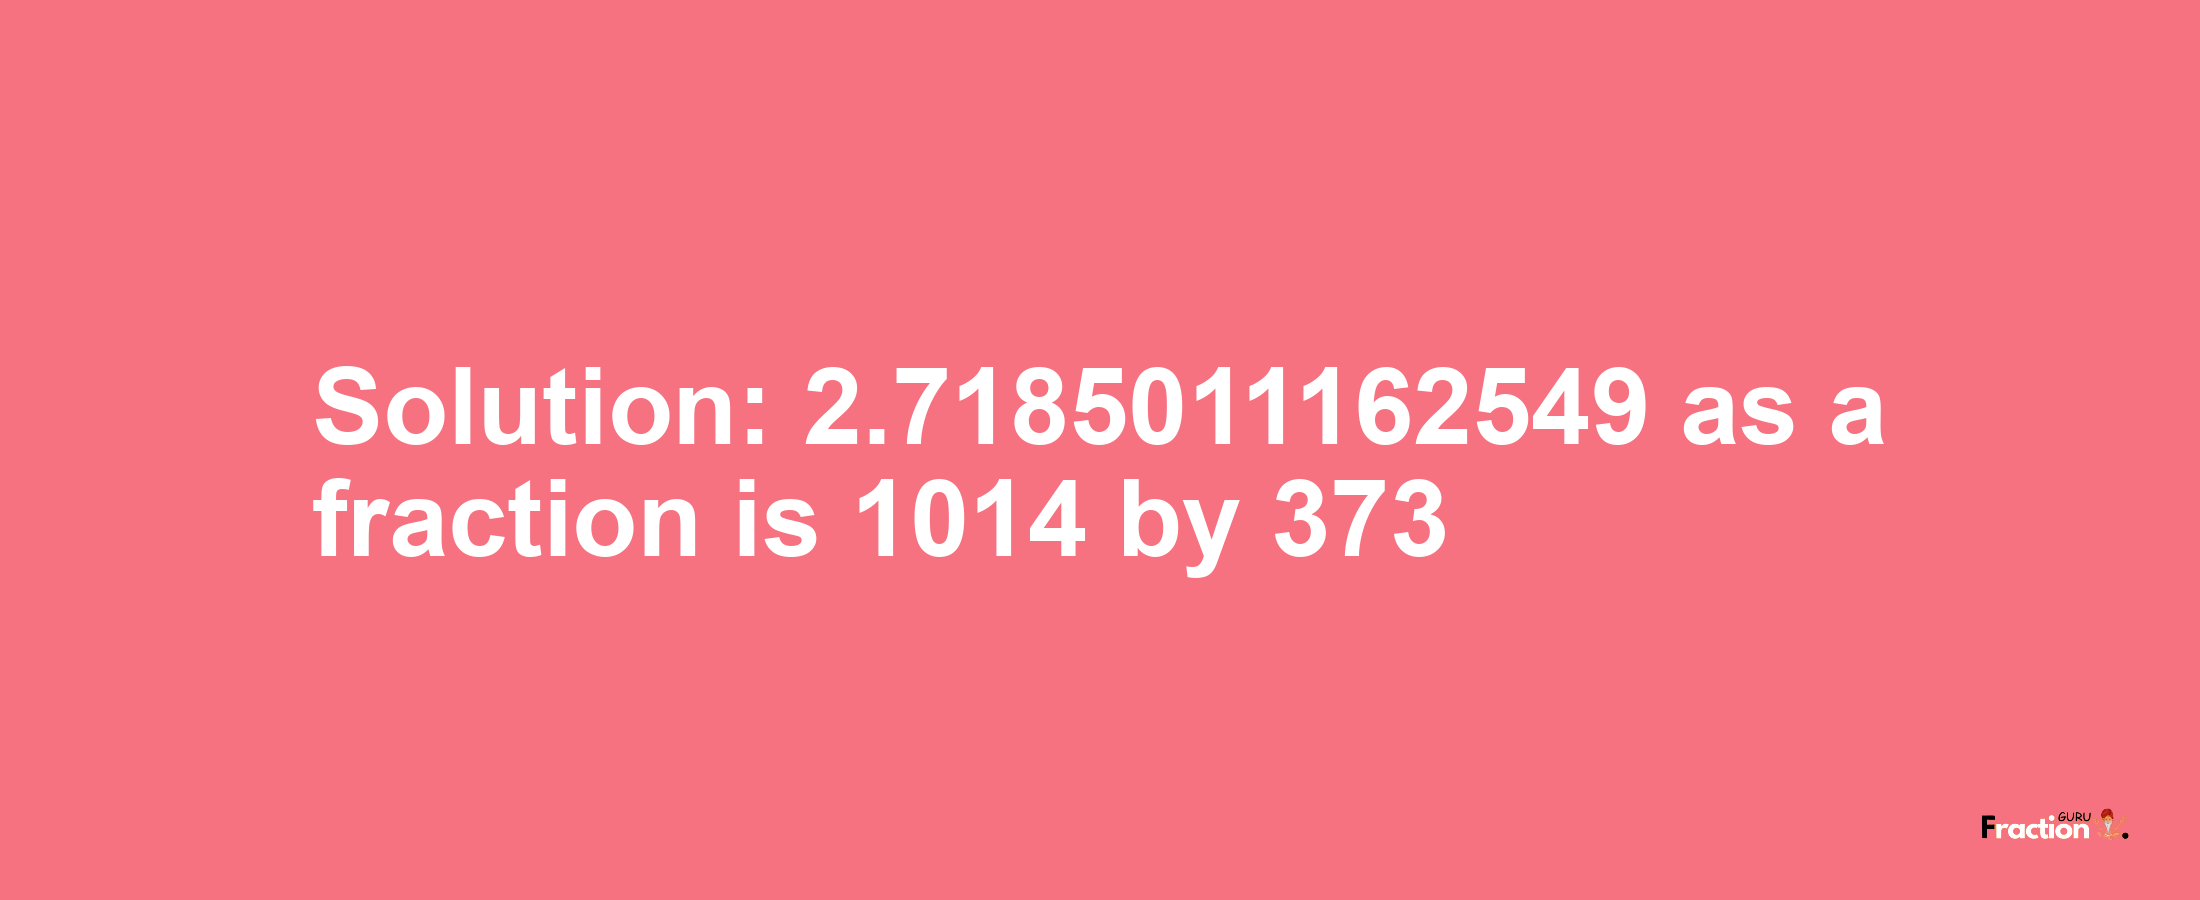 Solution:2.7185011162549 as a fraction is 1014/373